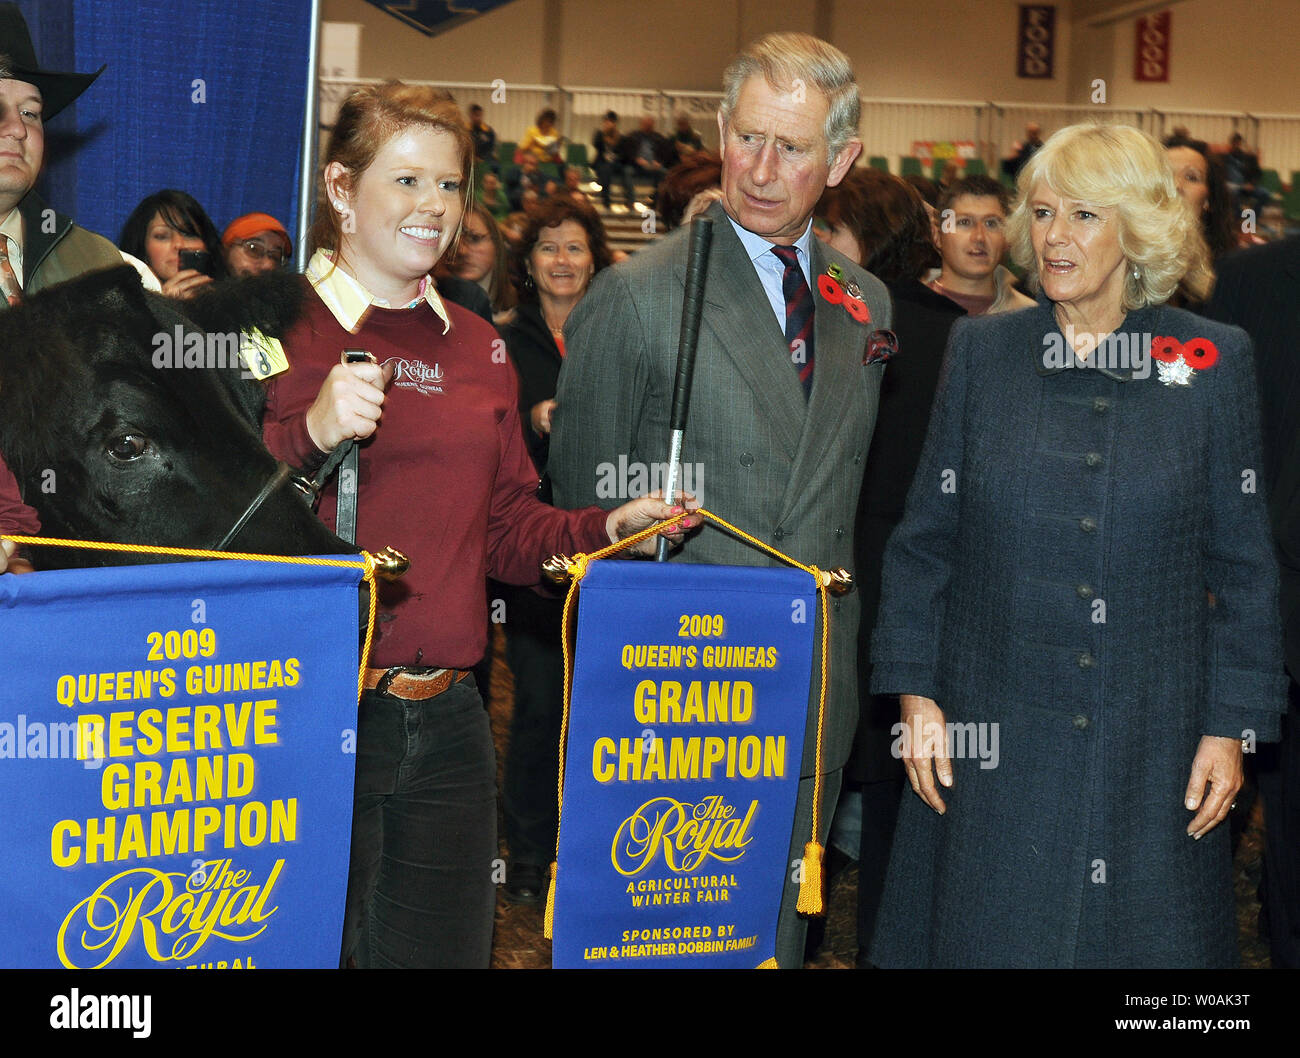 britains-prince-charles-and-his-wife-camilla-r-duchess-of-cornwall-present-the-championship-ribbon-to-the-supreme-champion-steer-of-the-queens-guineas-beef-cattle-competition-at-the-royal-agricultural-winter-fair-in-toronto-canada-on-november-6-2009-upi-christine-chew-W0AK3T.jpg